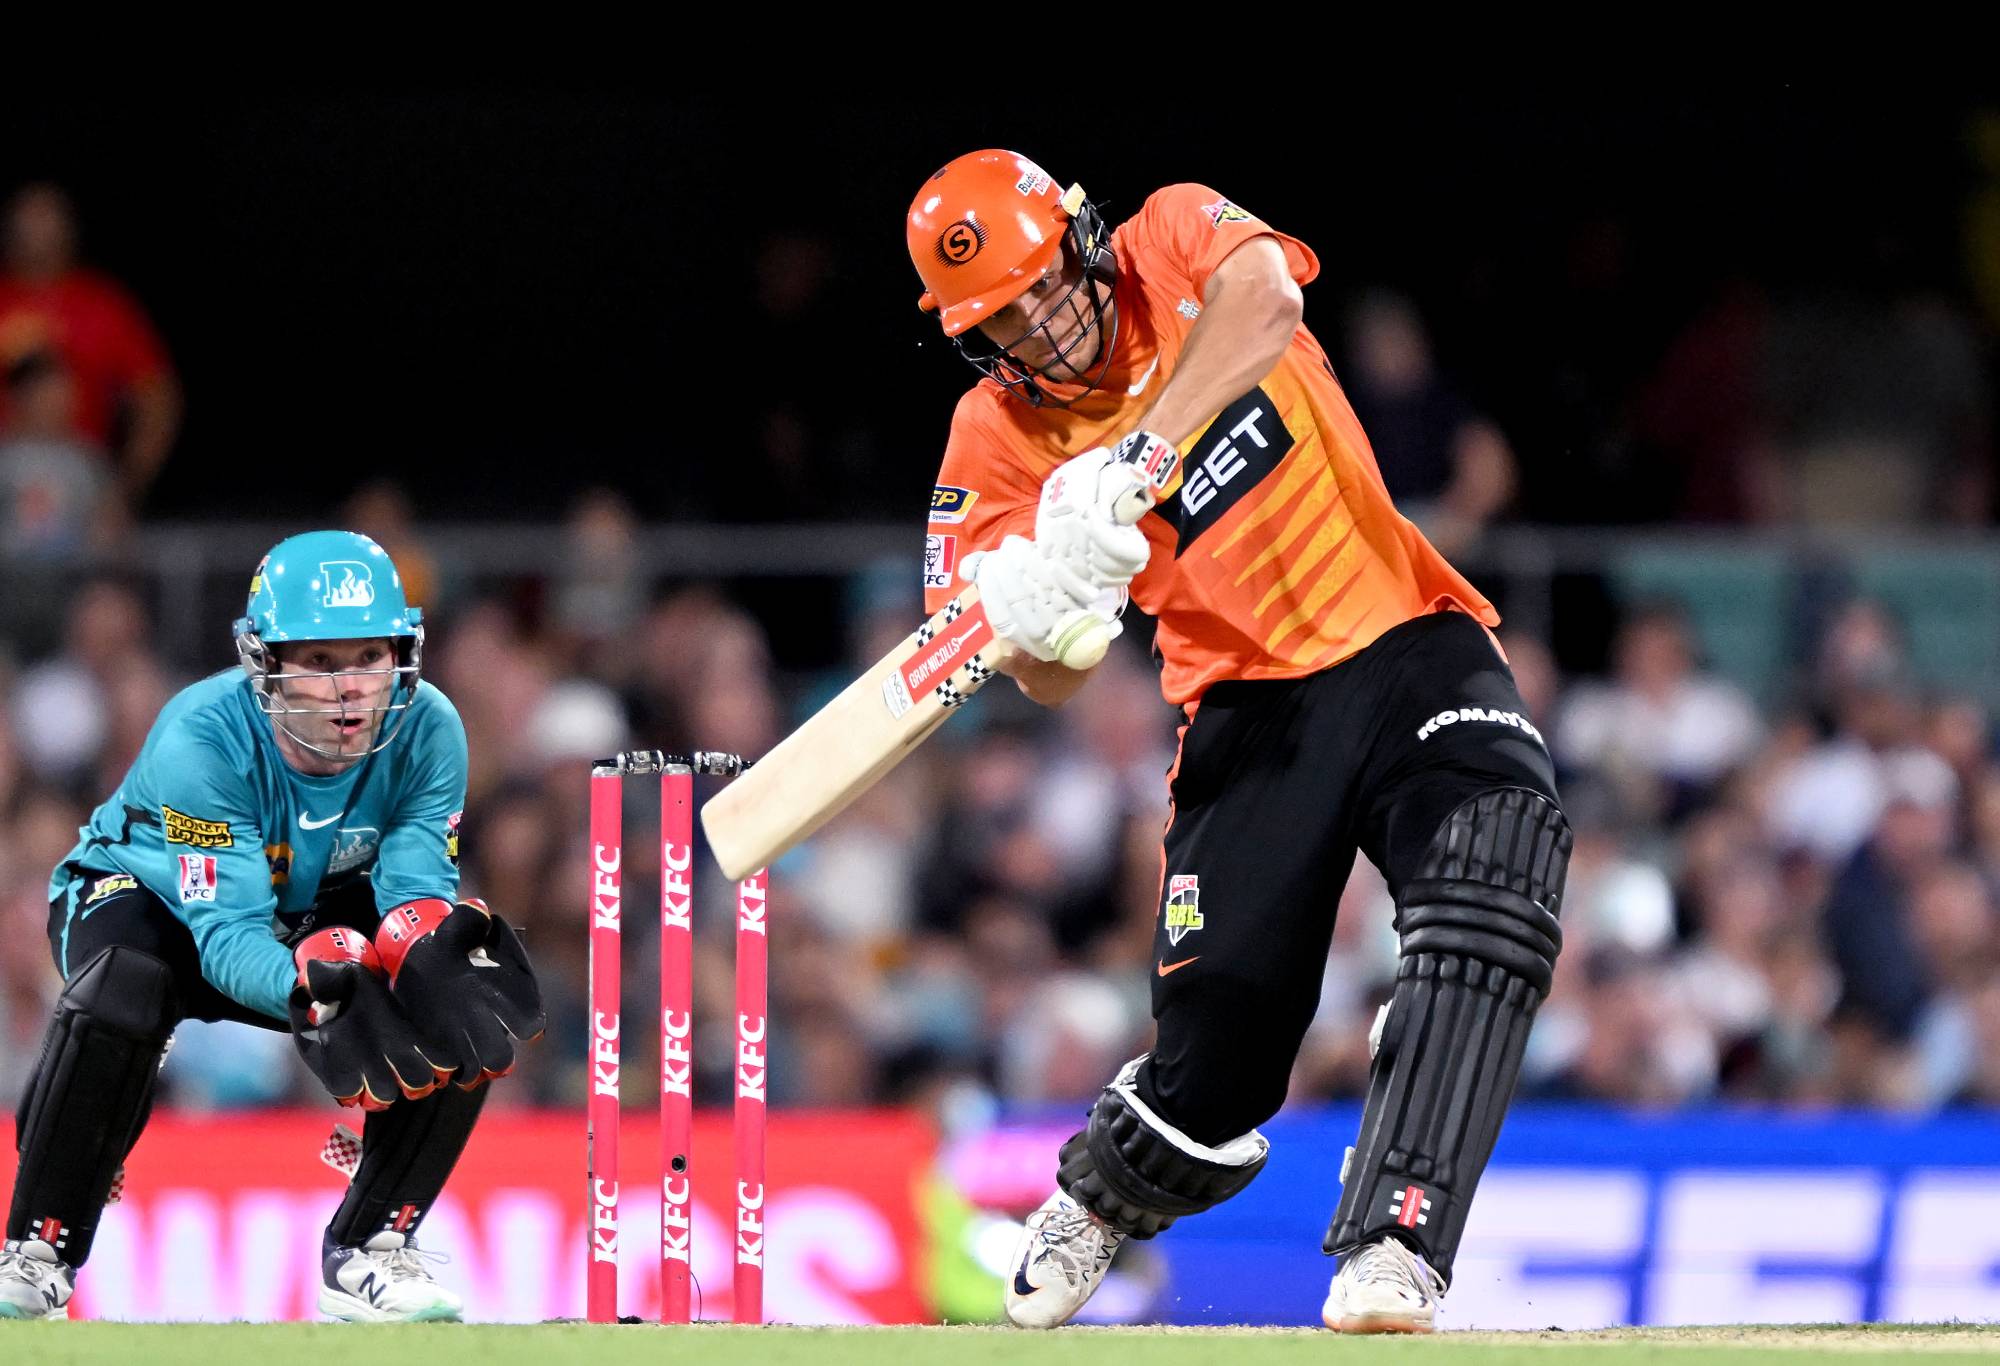 BRISBANE, AUSTRALIA - JANUARY 11: Aaron Hardie of the Scorchers plays a shot during the Men's Big Bash League match between the Brisbane Heat and the Perth Scorchers at The Gabba, on January 11, 2023, in Brisbane, Australia. (Photo by Bradley Kanaris/Getty Images)